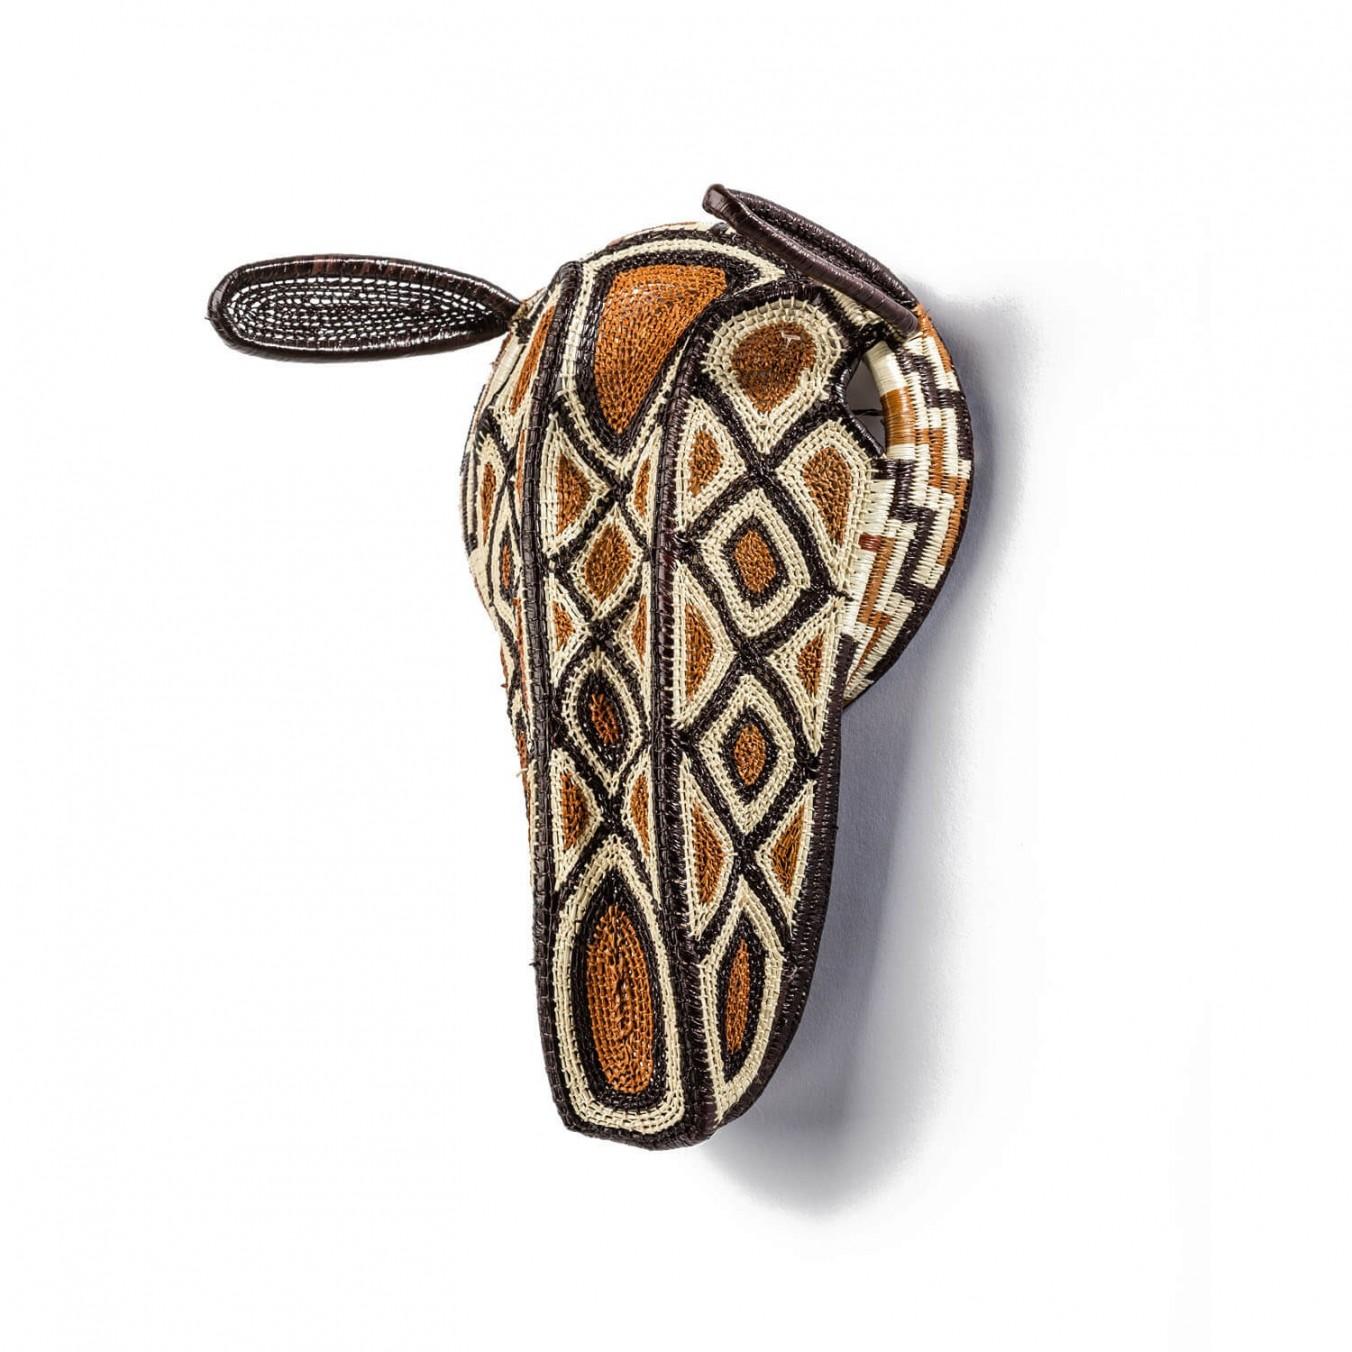 Decorative hand-woven mask from Panama, Nemboro by Ethic&Tropic

Extraordinary art and decorative items, these masks come from the shamanic beliefs and rituals of indigenous Embera tribes of Panama. Through the shamans, Embera people get in